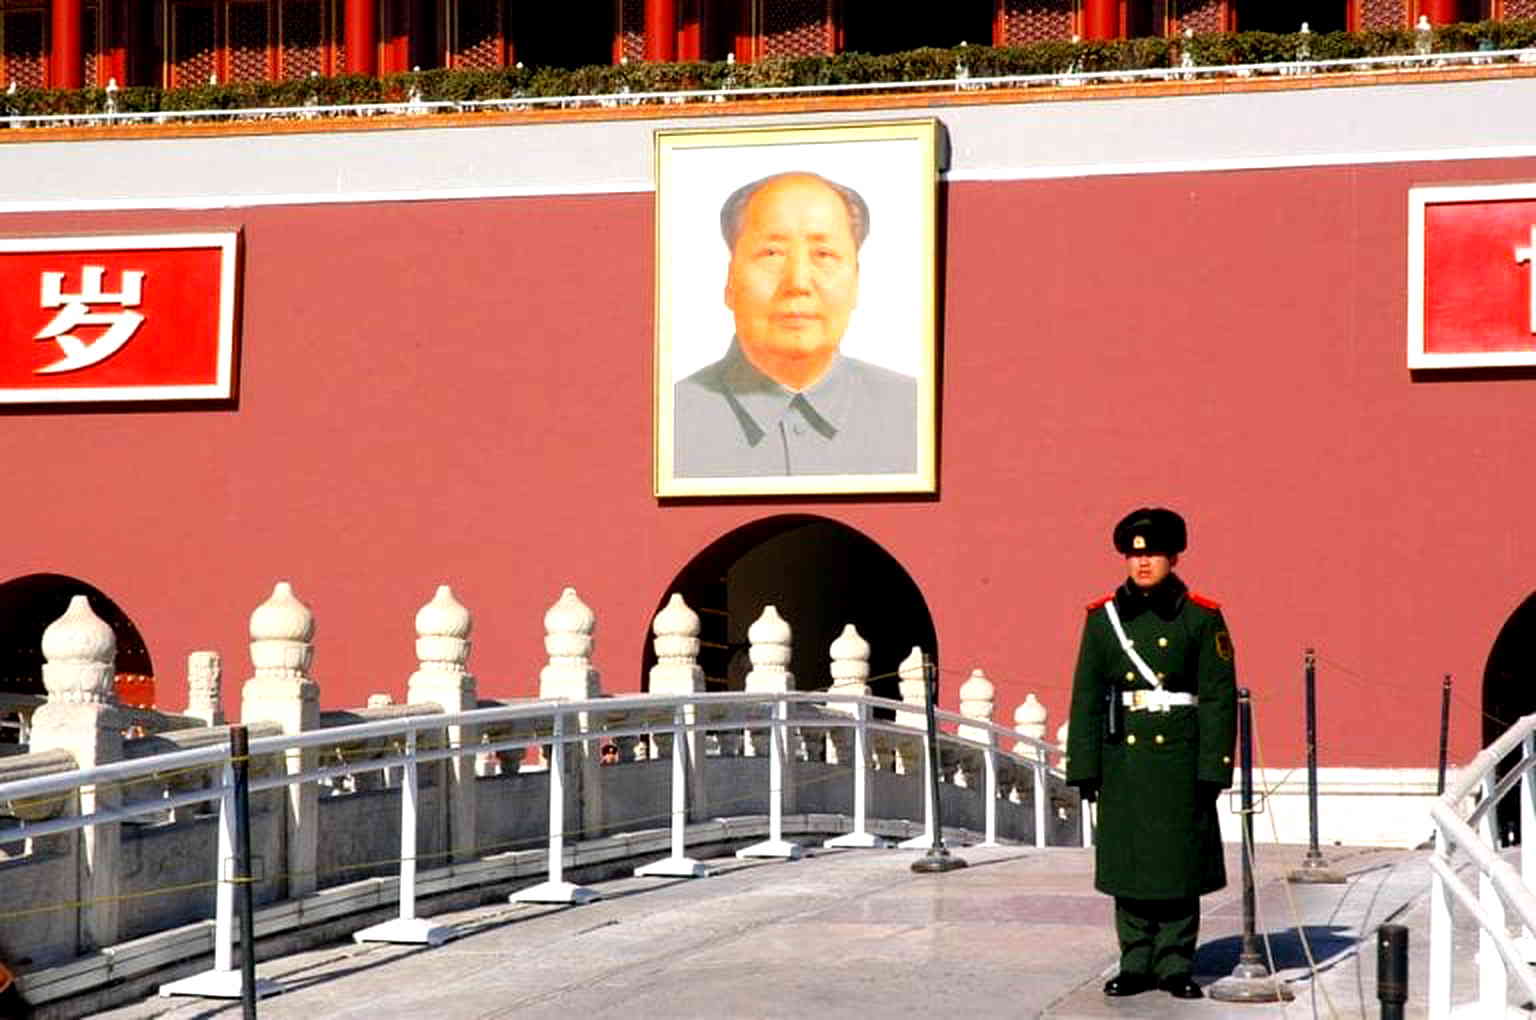 Chinese Professor Loses 3 Jobs After Criticizing Mao Zedong in Blog Post